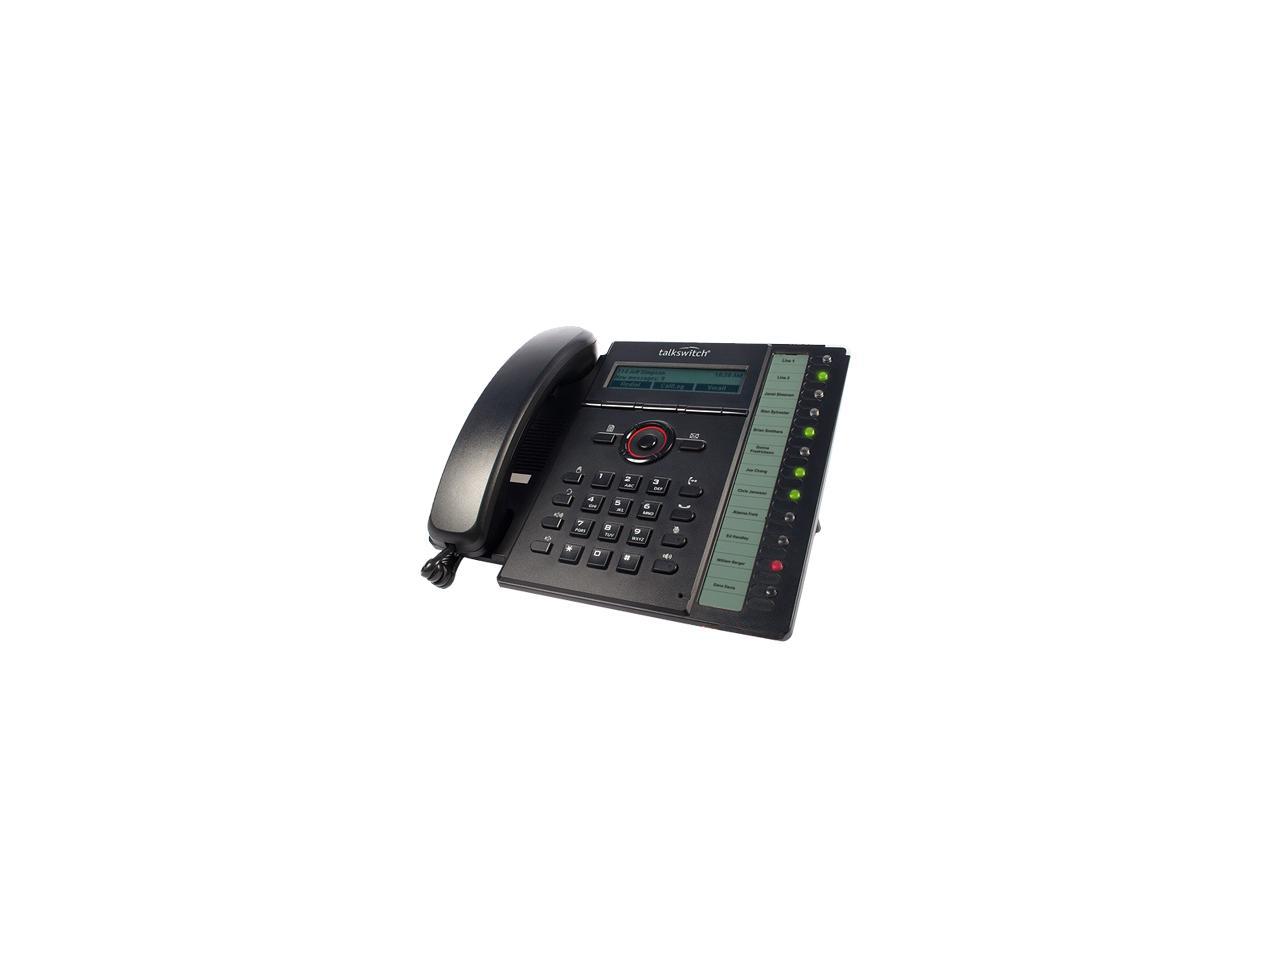 FON-450i Fortinet FortiFone-450i Business VOIP SIP Phone 10/100 Lan 10/100 PC PoE with Power Adapter 10 up to 34 lines with 2FON-50e Exp 